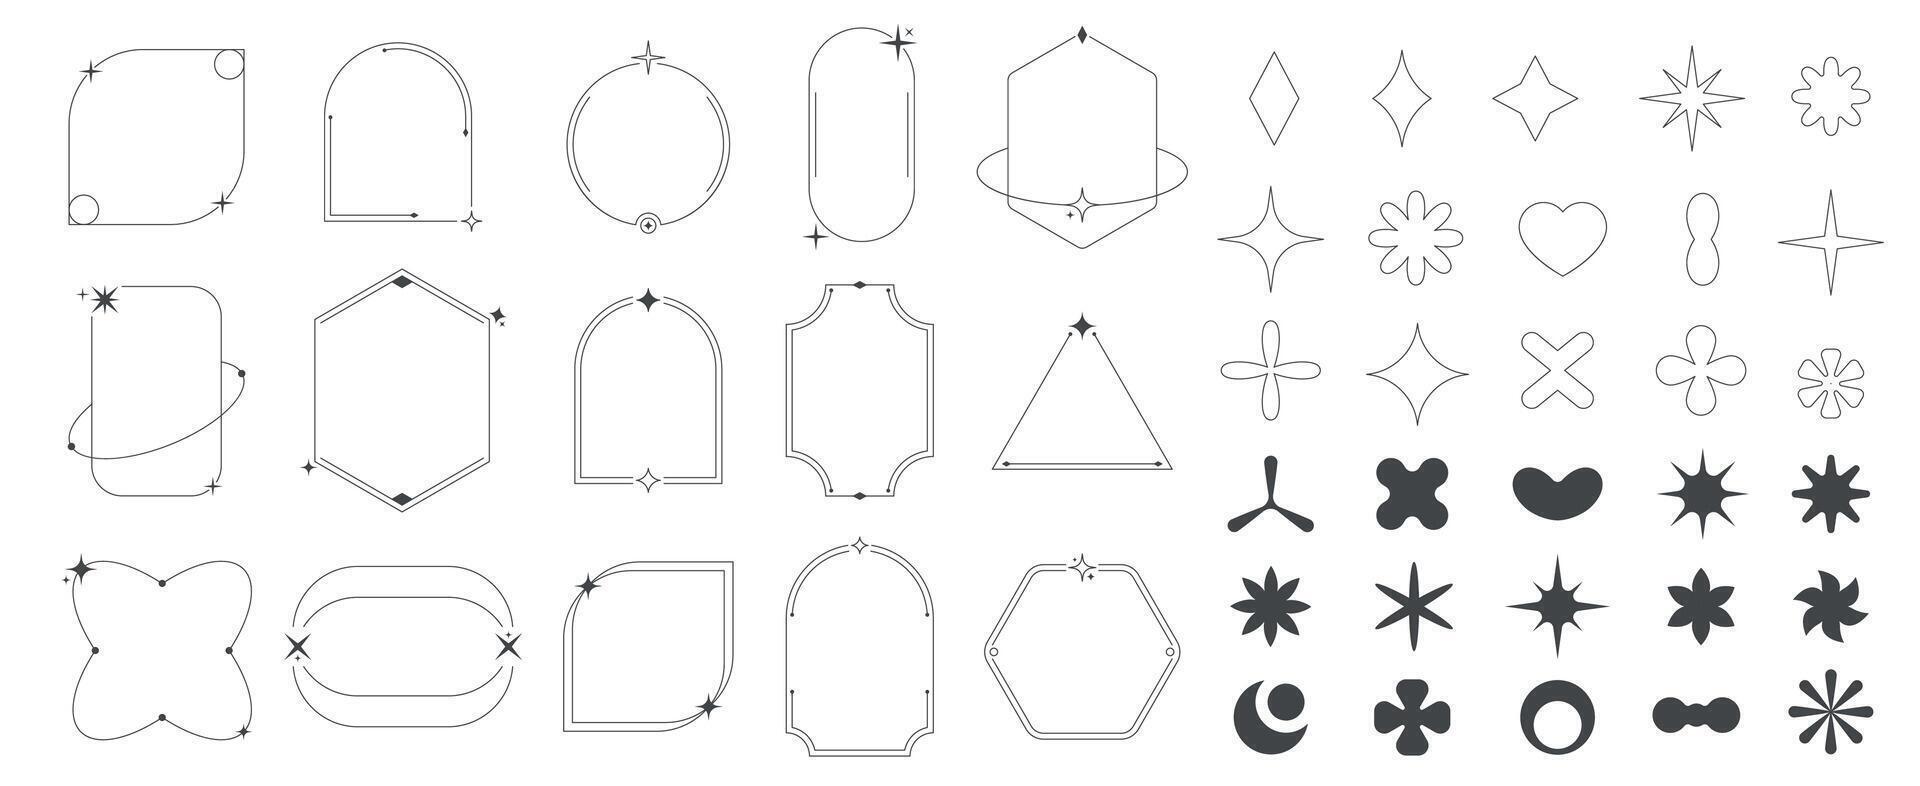 Trendy line geometric shapes. Abstract modern outline forms, minimal brutalist silhouettes, retro cosmic sign symbol flat style vector collection